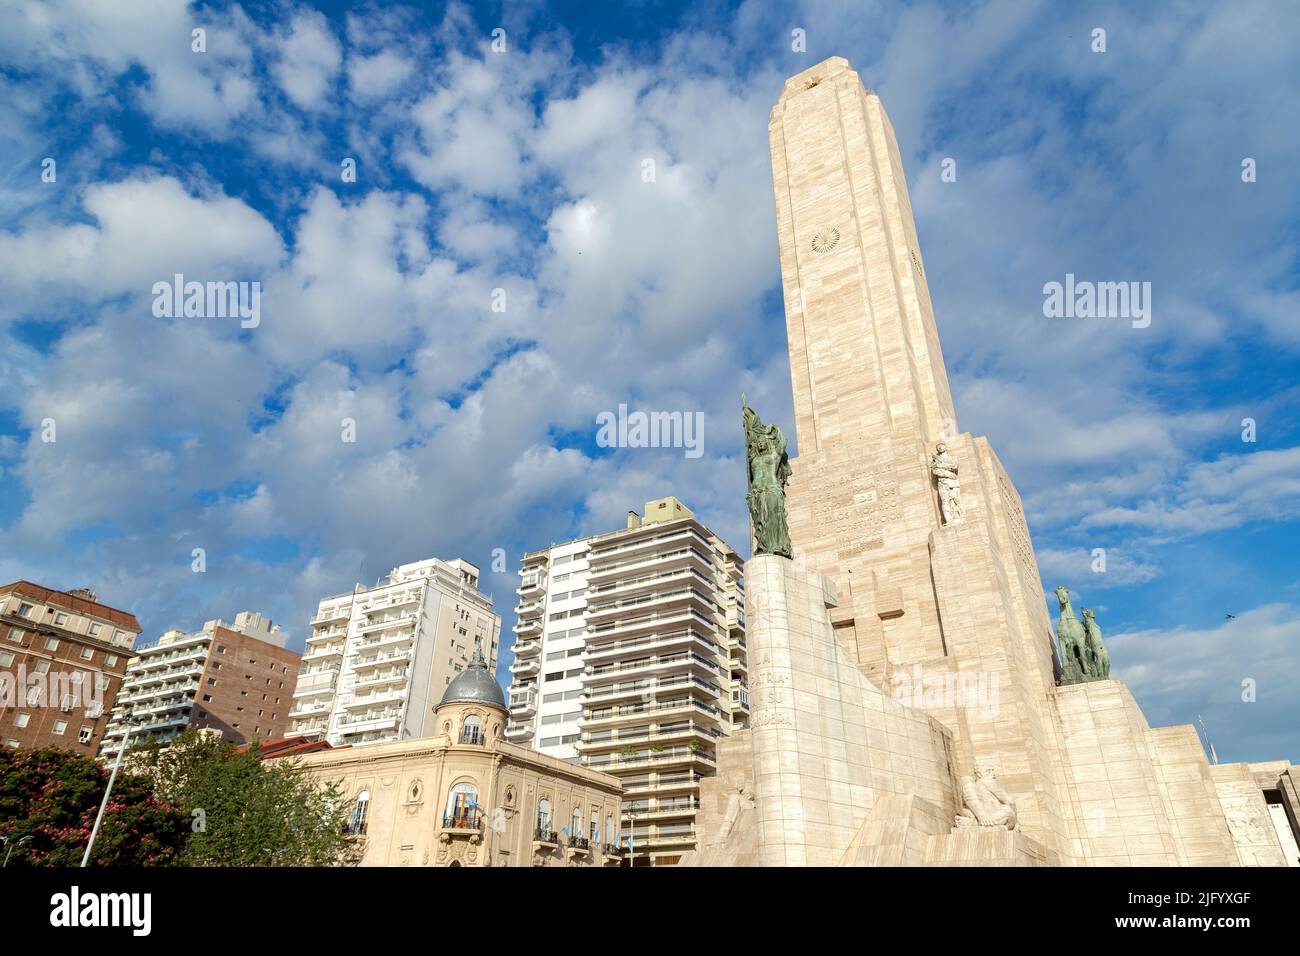 ROSARIO, ARGENTINA - MARCH 12, 2021: National Flag Monument. View of the main tower. The city at the background. Stock Photo